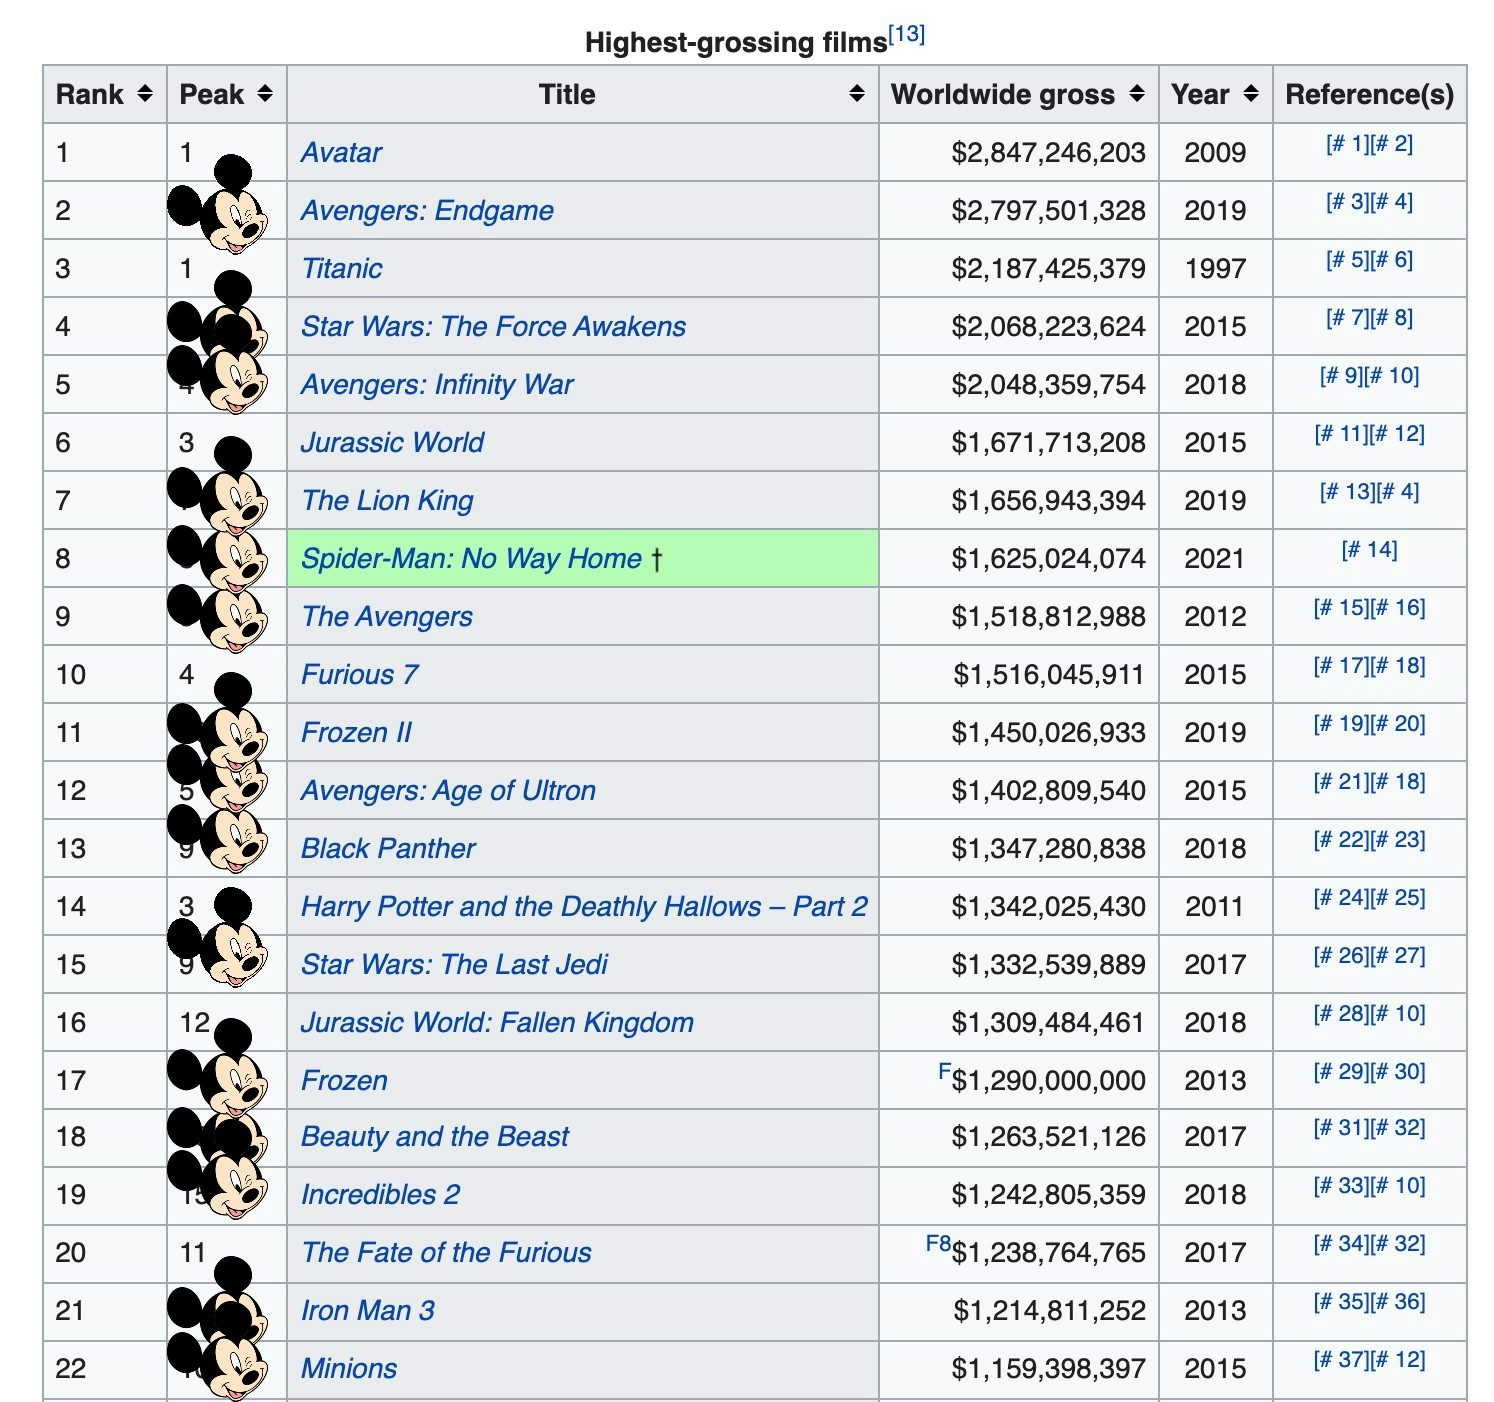 Disney owns most of the highest grossing films ever, and the distribution of even more. 